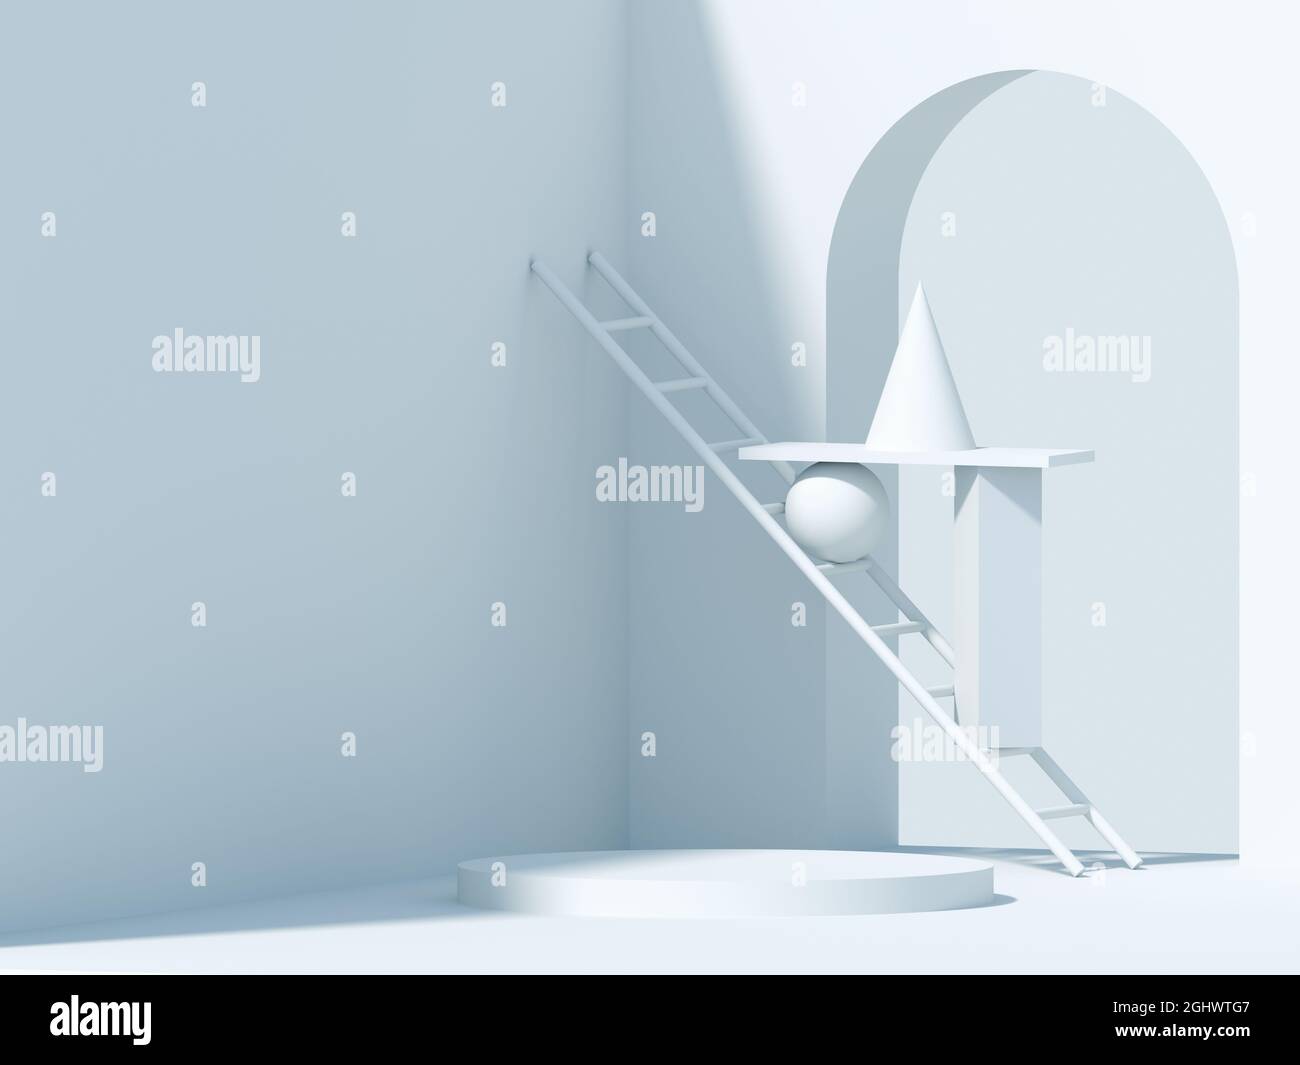 Abstract still life installation, white geometric shapes, arch and ladder. 3d rendering illustration Stock Photo